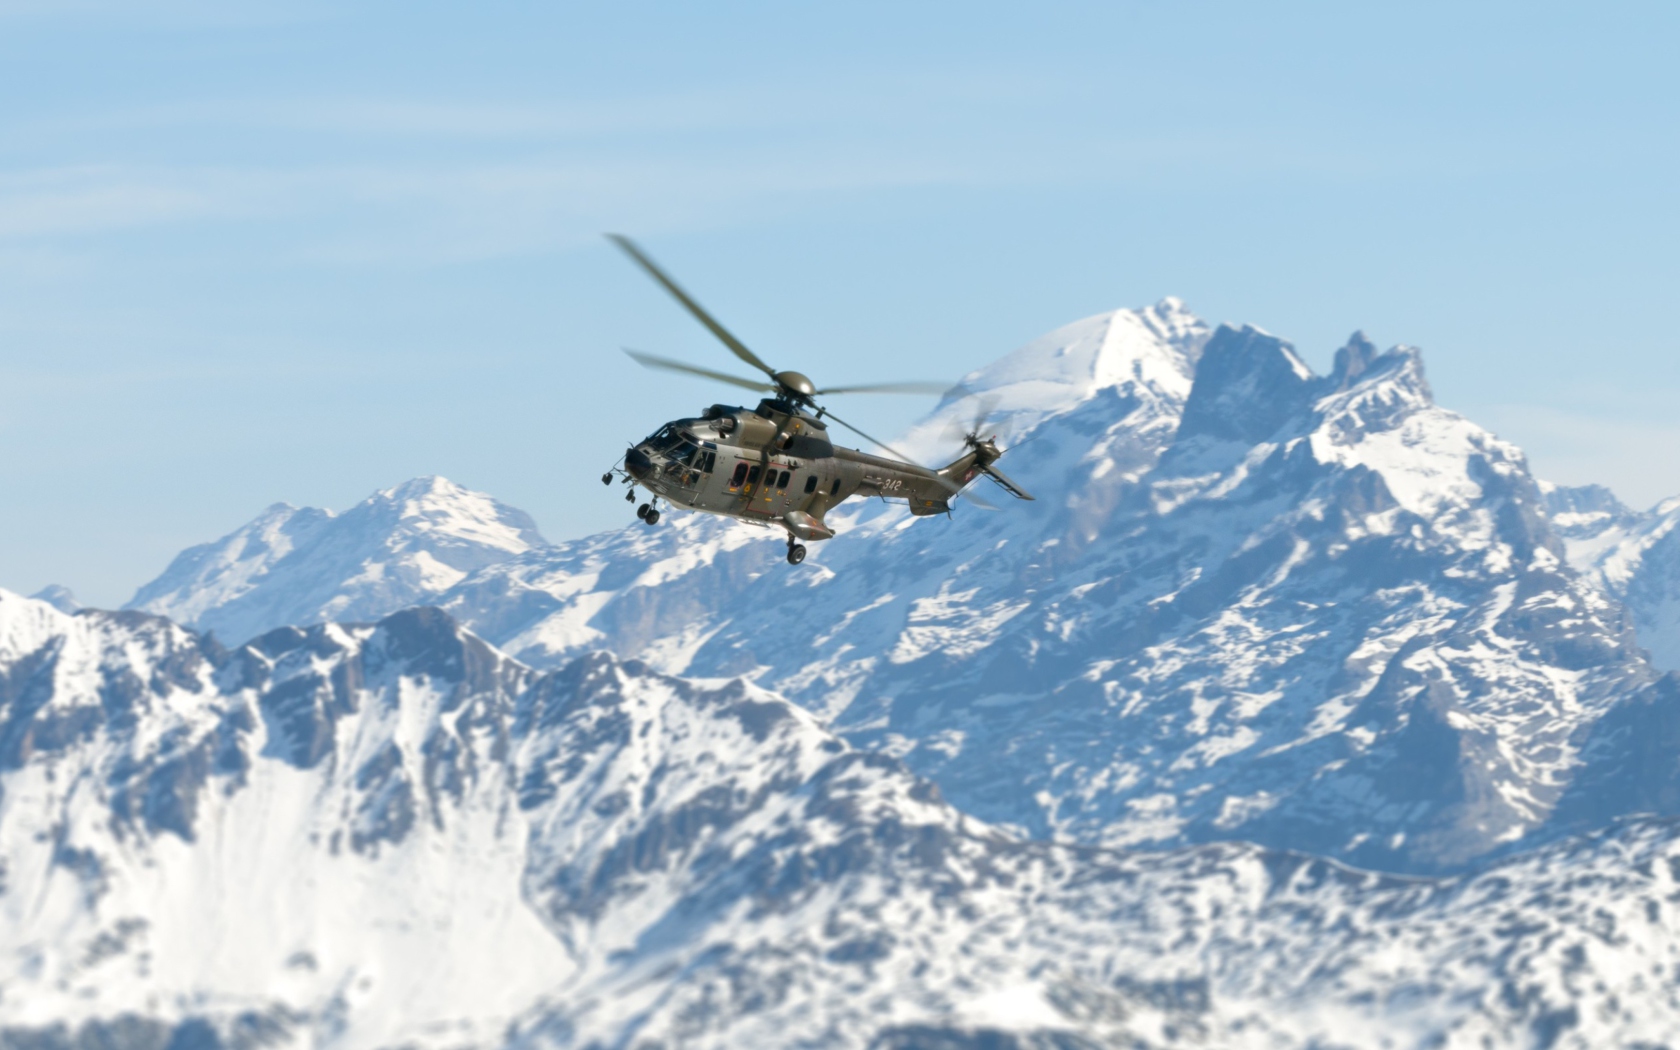 Helicopter Over Snowy Mountains wallpaper 1680x1050